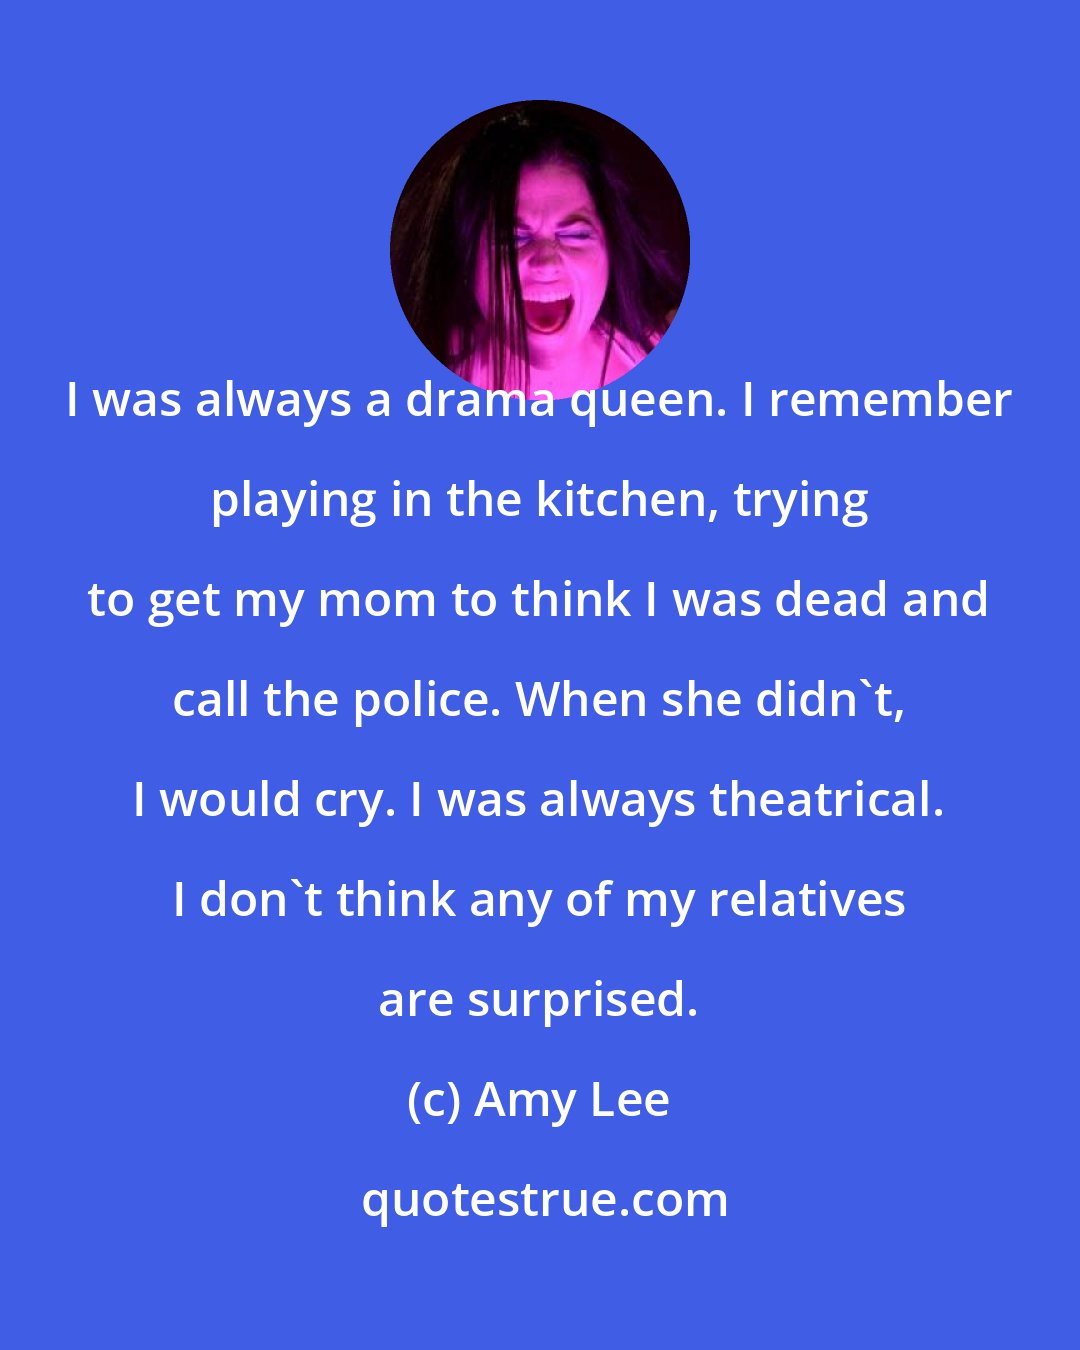 Amy Lee: I was always a drama queen. I remember playing in the kitchen, trying to get my mom to think I was dead and call the police. When she didn't, I would cry. I was always theatrical. I don't think any of my relatives are surprised.